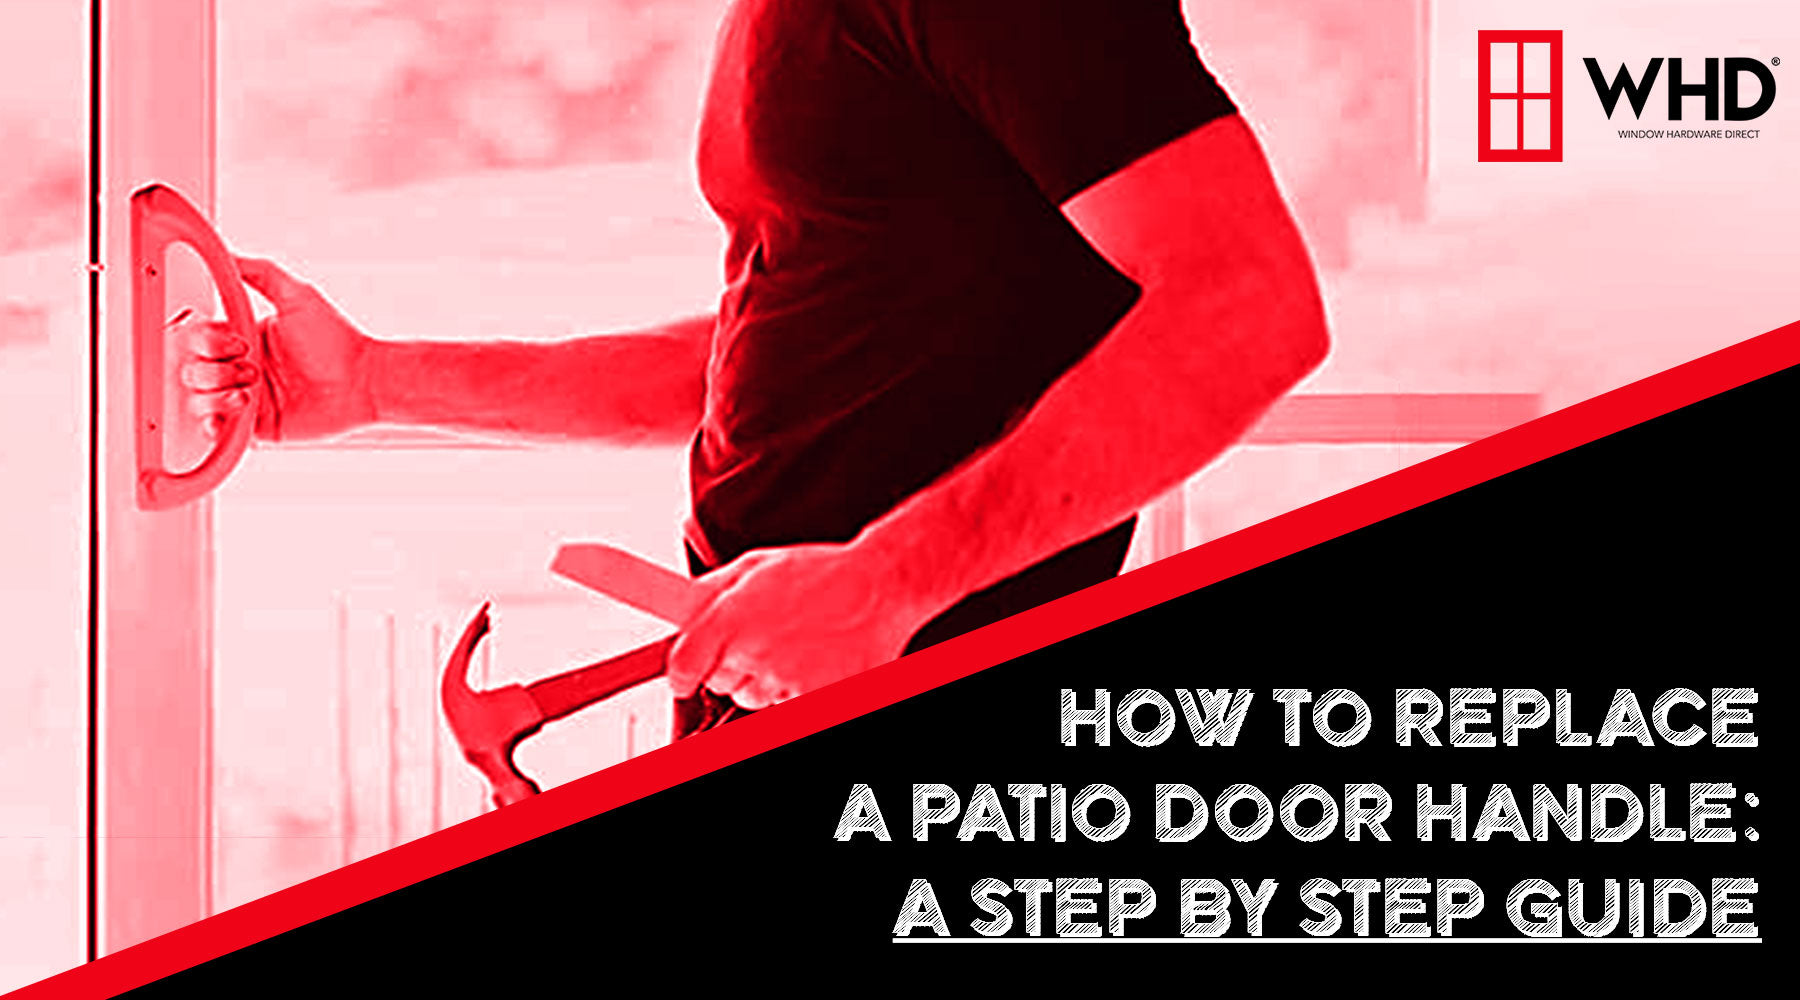 How to Replace a Patio Door Handle: A Step-by-Step Guide